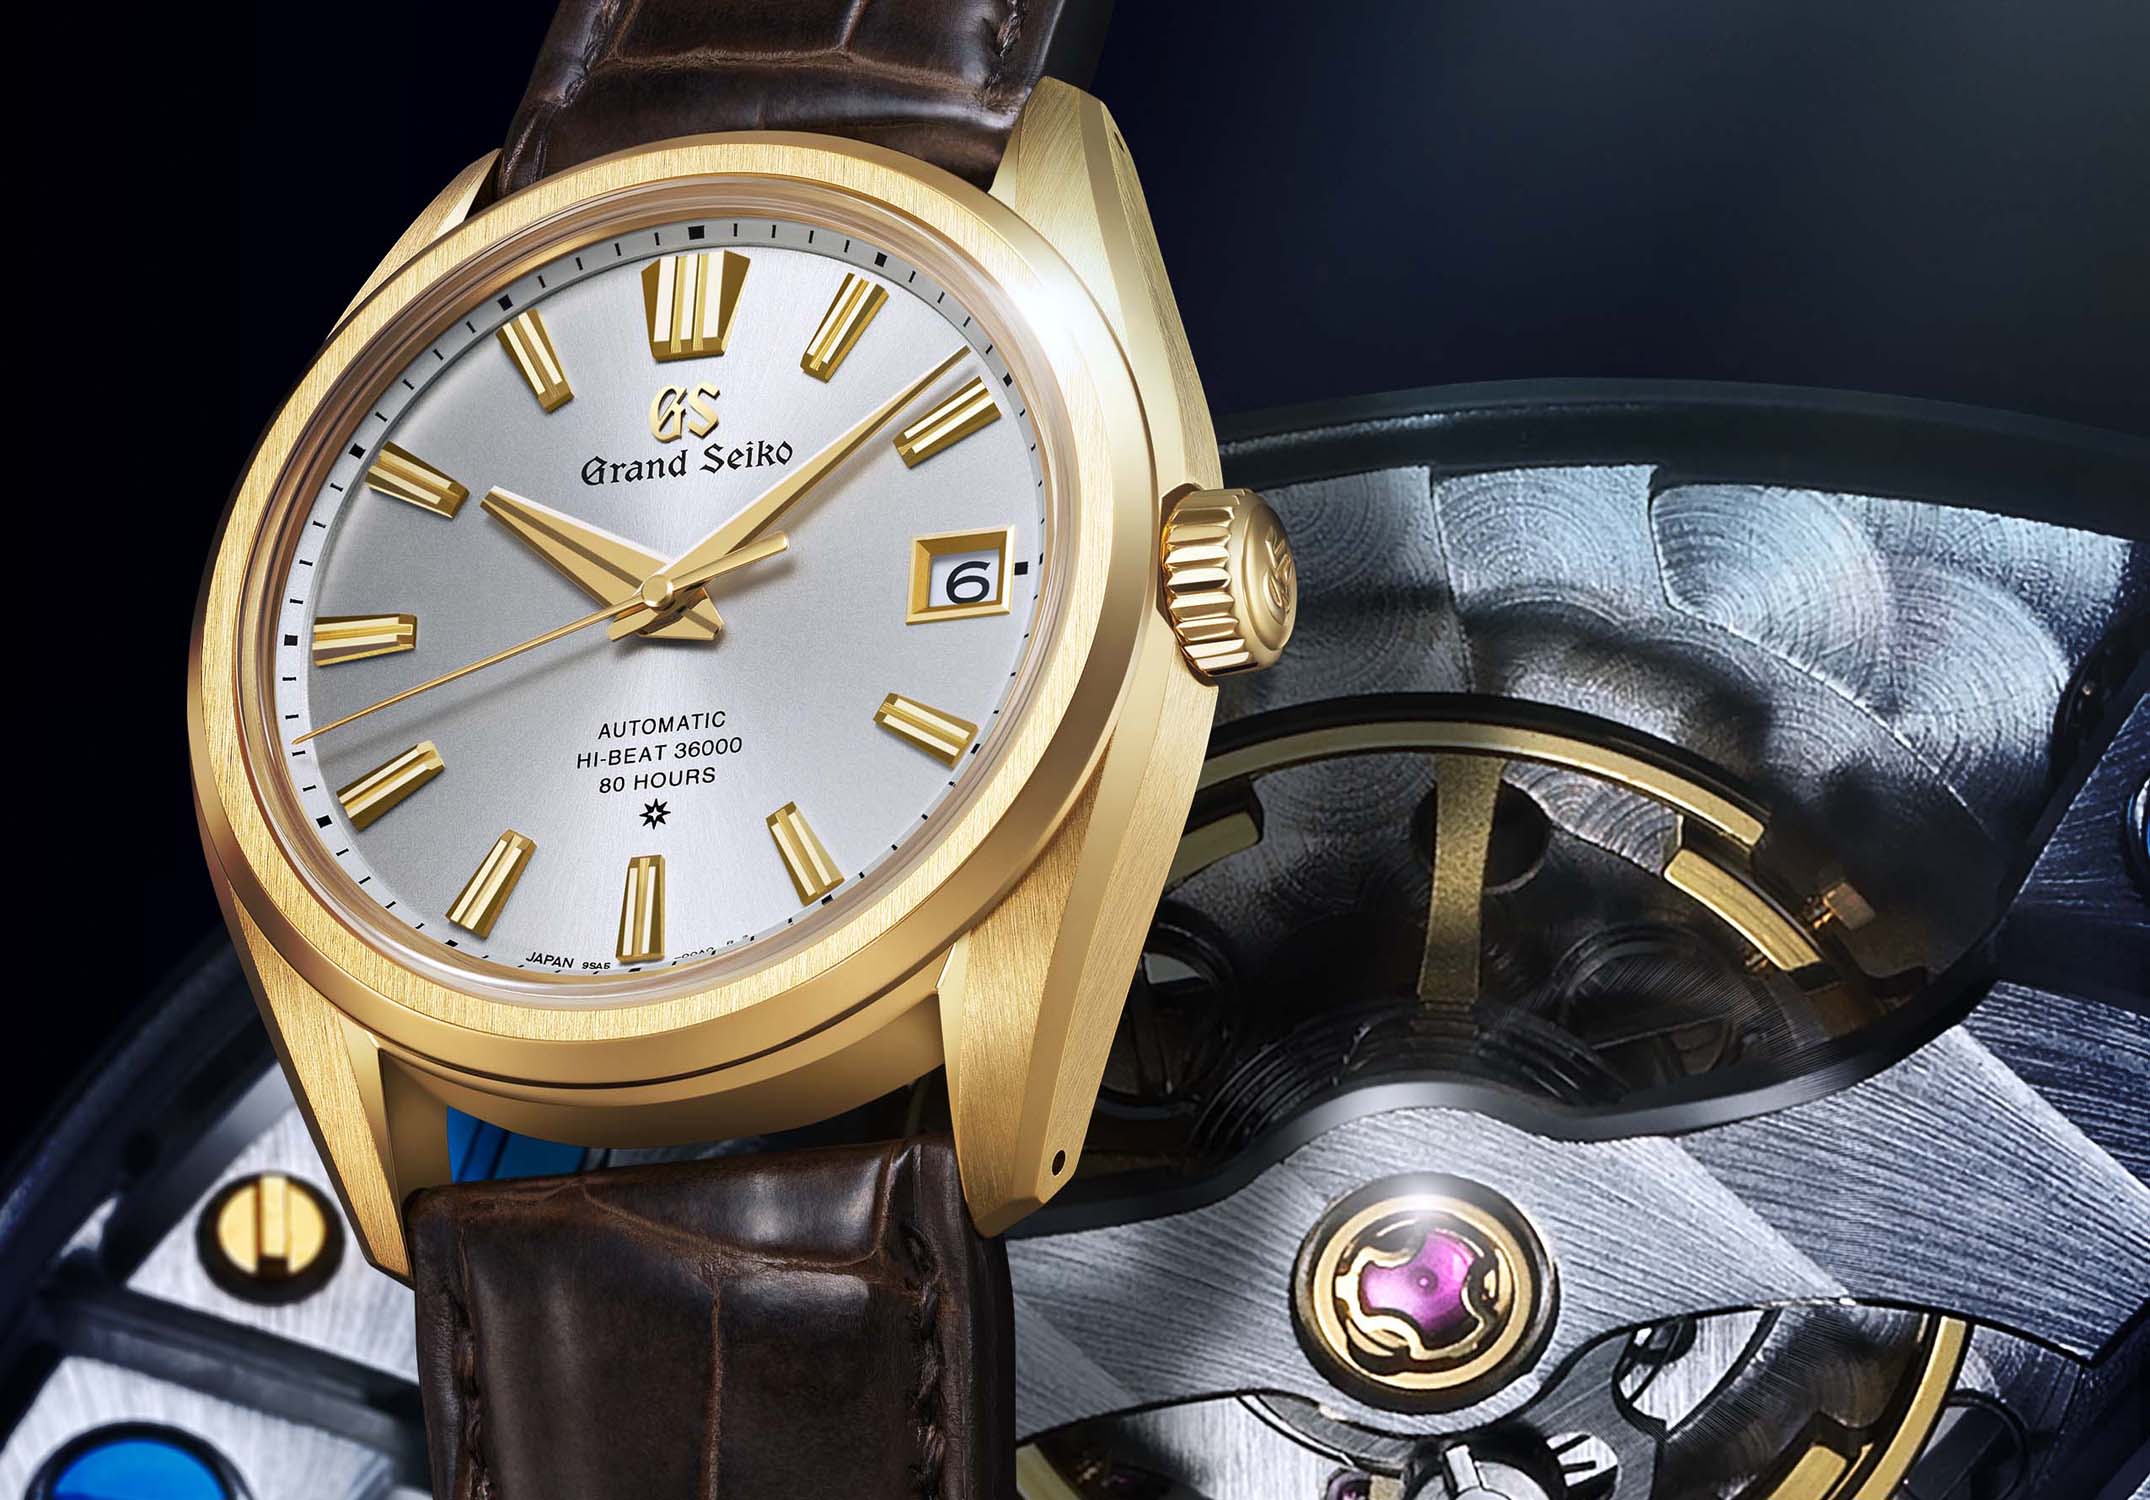 Grand Seiko Designs Three Exclusive Pieces For Watches Of Switzerland